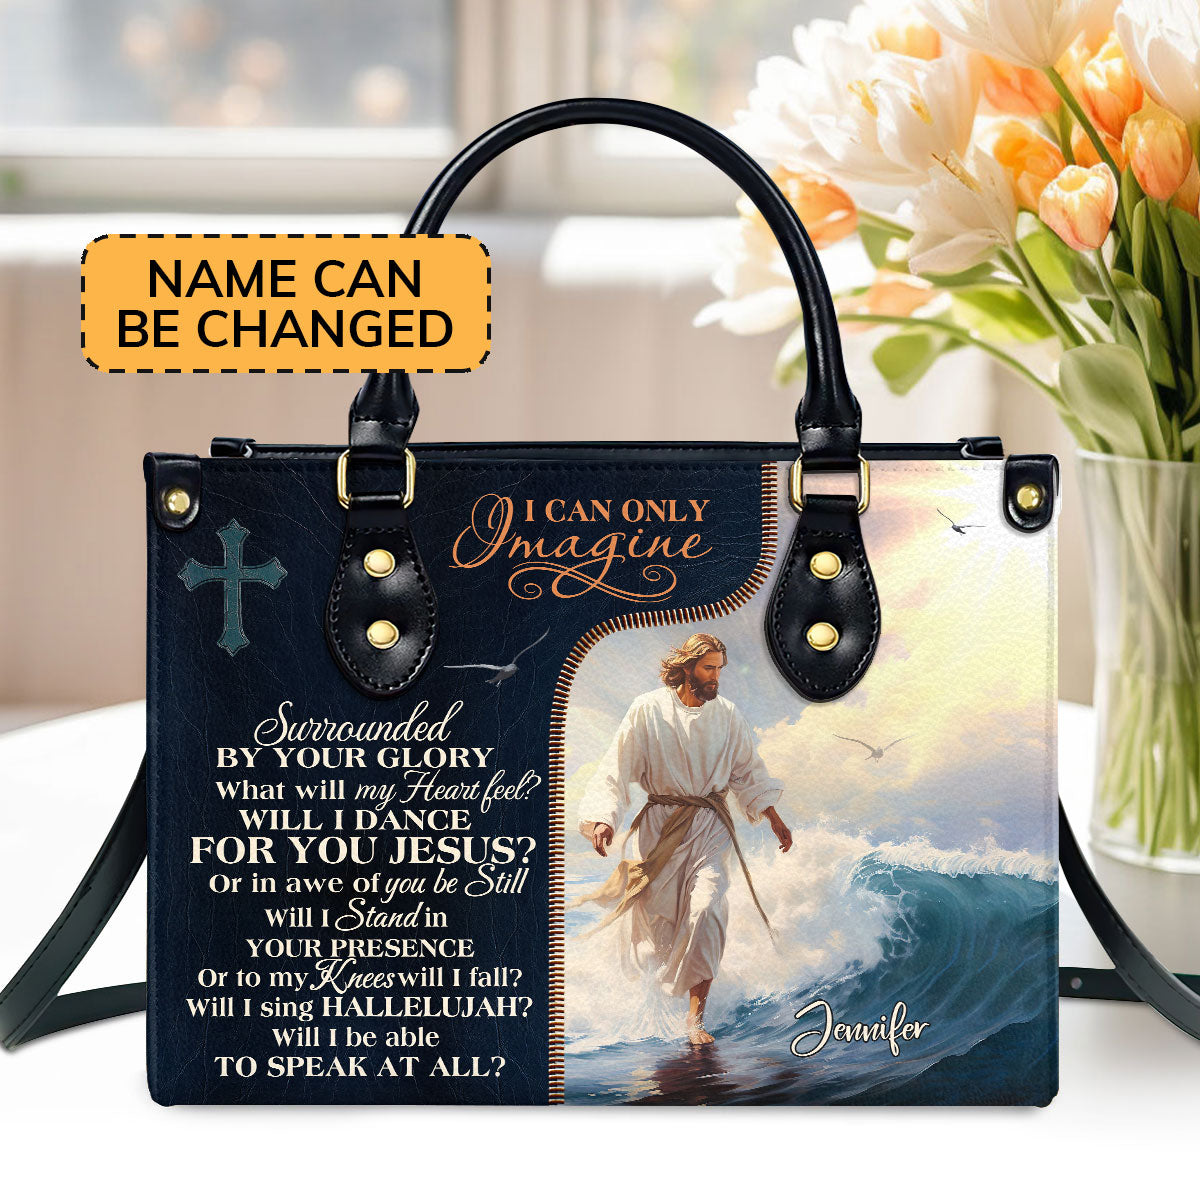 Jesus I Can Only Imagine  Personalized Leather Handbag With Zipper - Inspirational Gift Christian Ladies